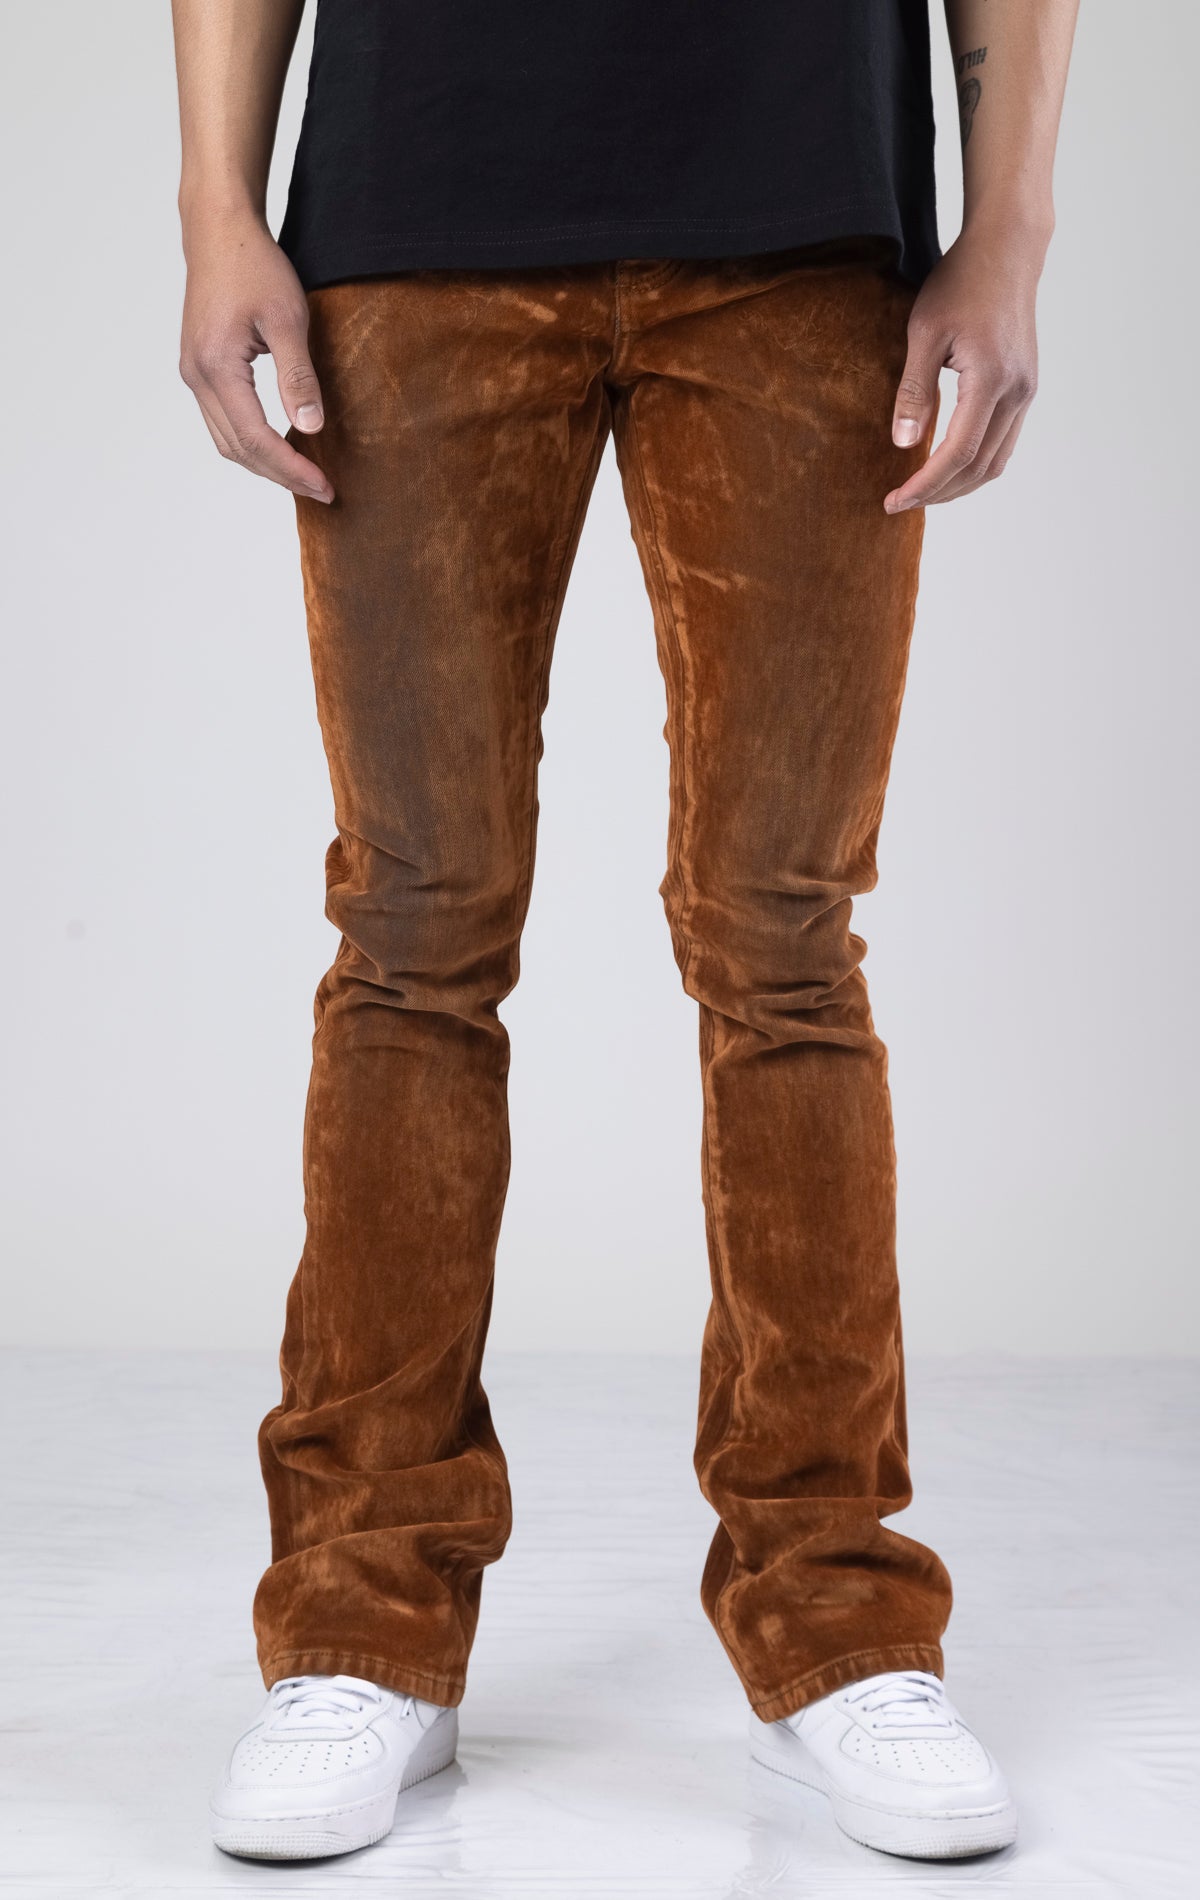 Brown suede stacked flare jeans with a comfortable cotton-spandex blend.